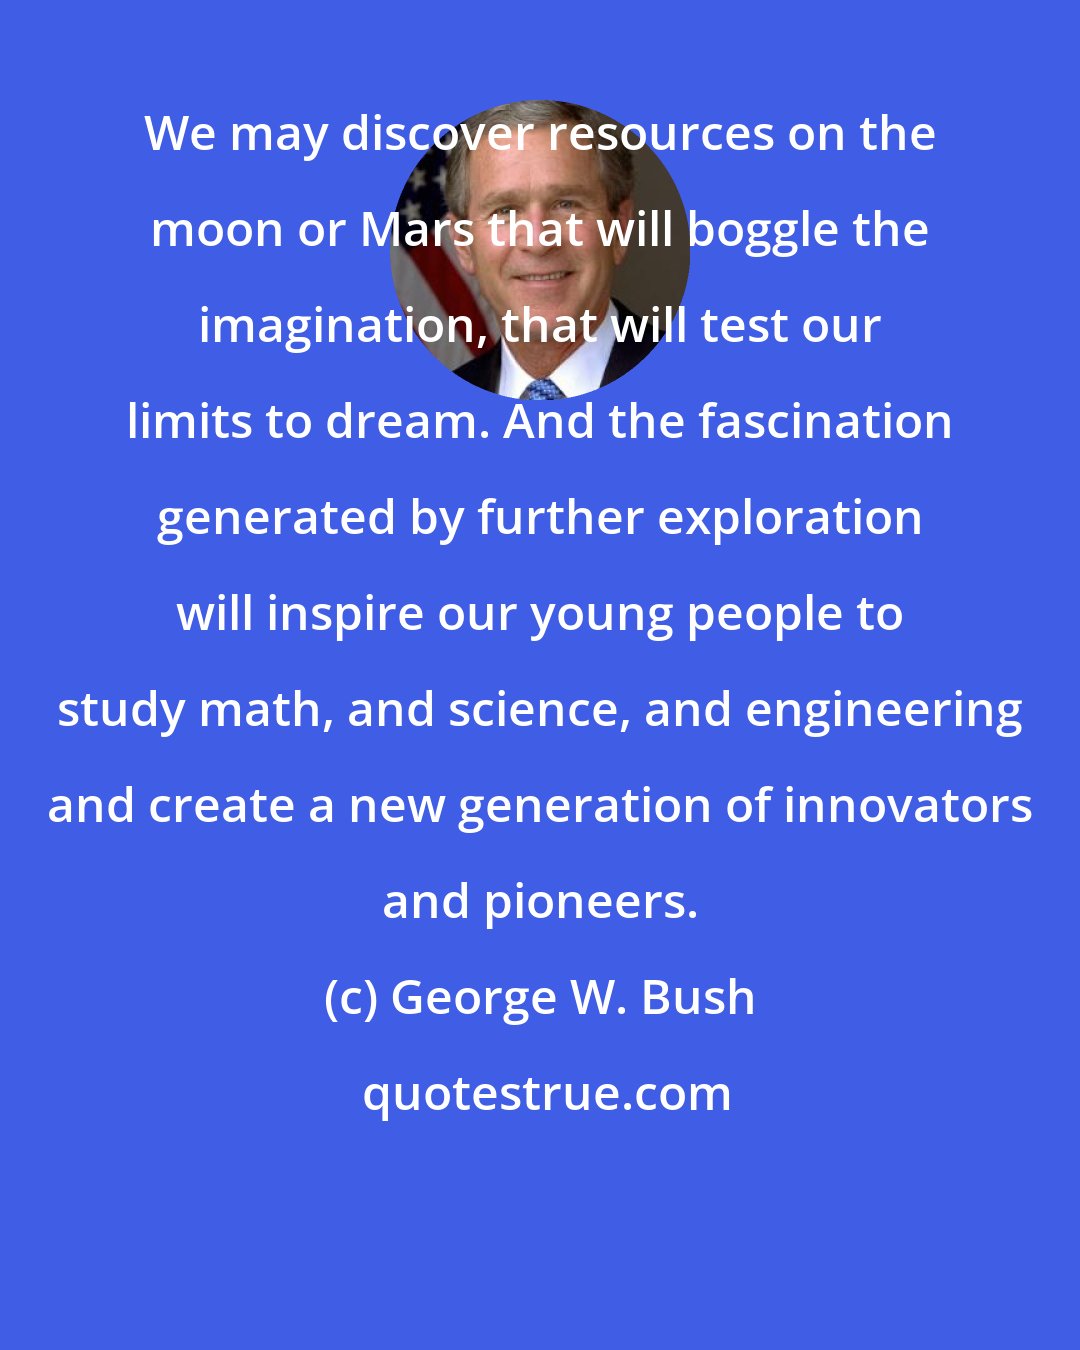 George W. Bush: We may discover resources on the moon or Mars that will boggle the imagination, that will test our limits to dream. And the fascination generated by further exploration will inspire our young people to study math, and science, and engineering and create a new generation of innovators and pioneers.